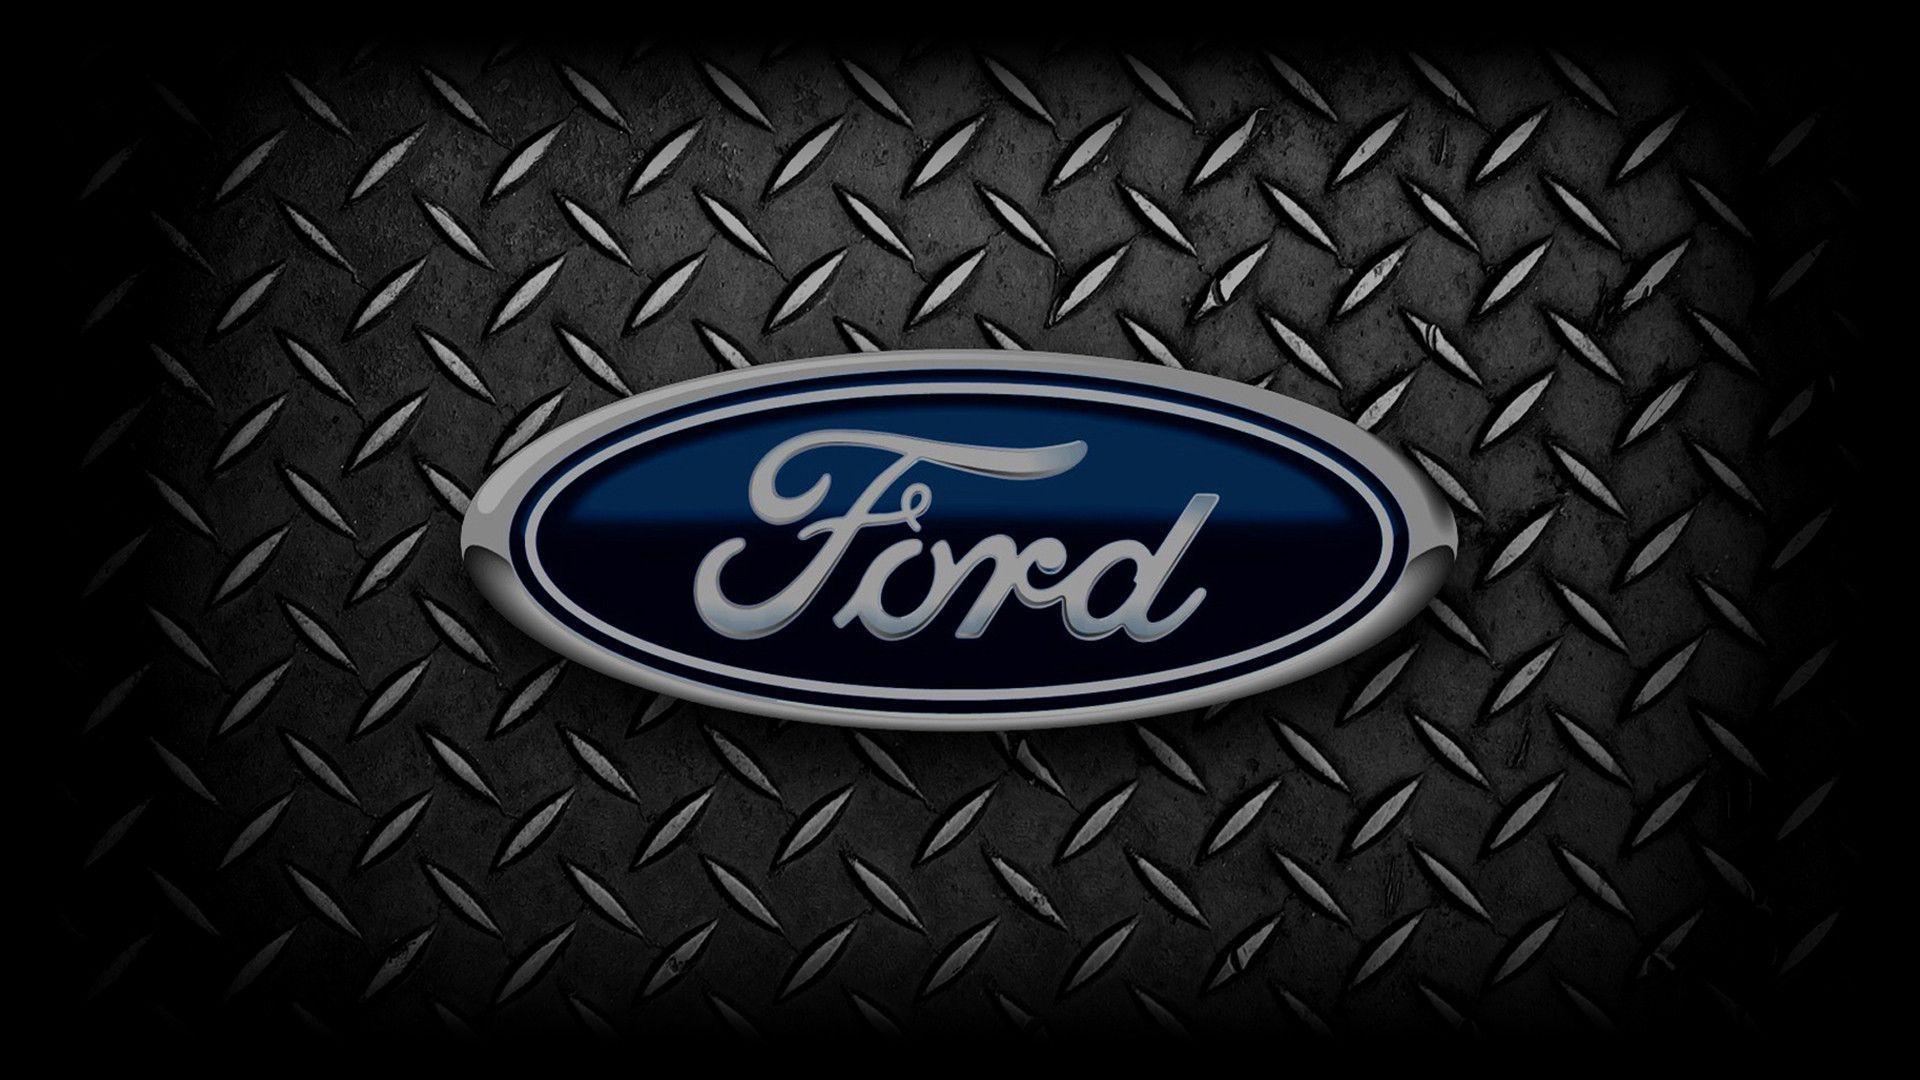 Ford Hd Computer Wallpapers Top Free Ford Hd Computer Backgrounds Wallpaperaccess